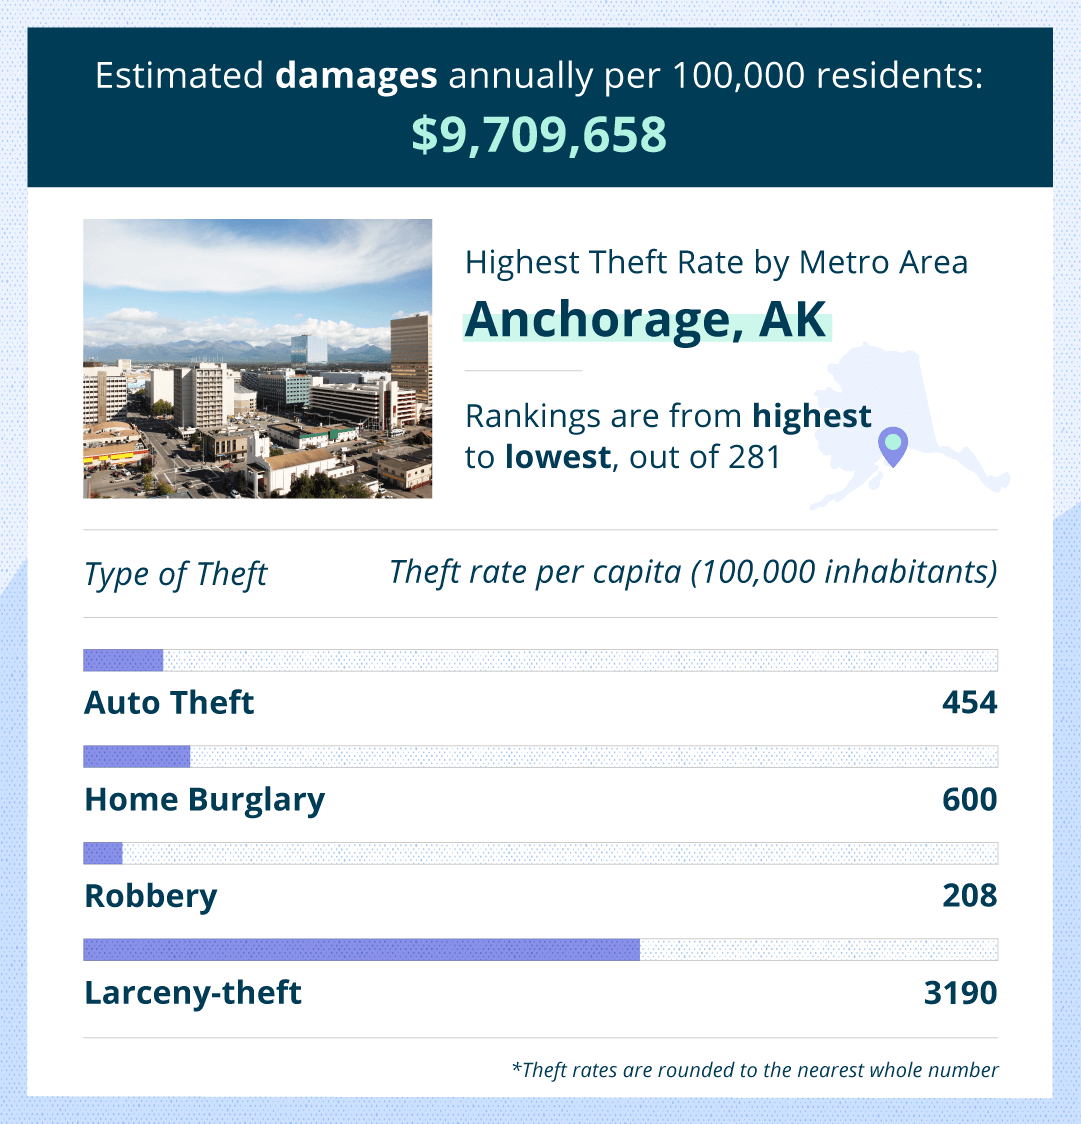 anchorage theft damage stats